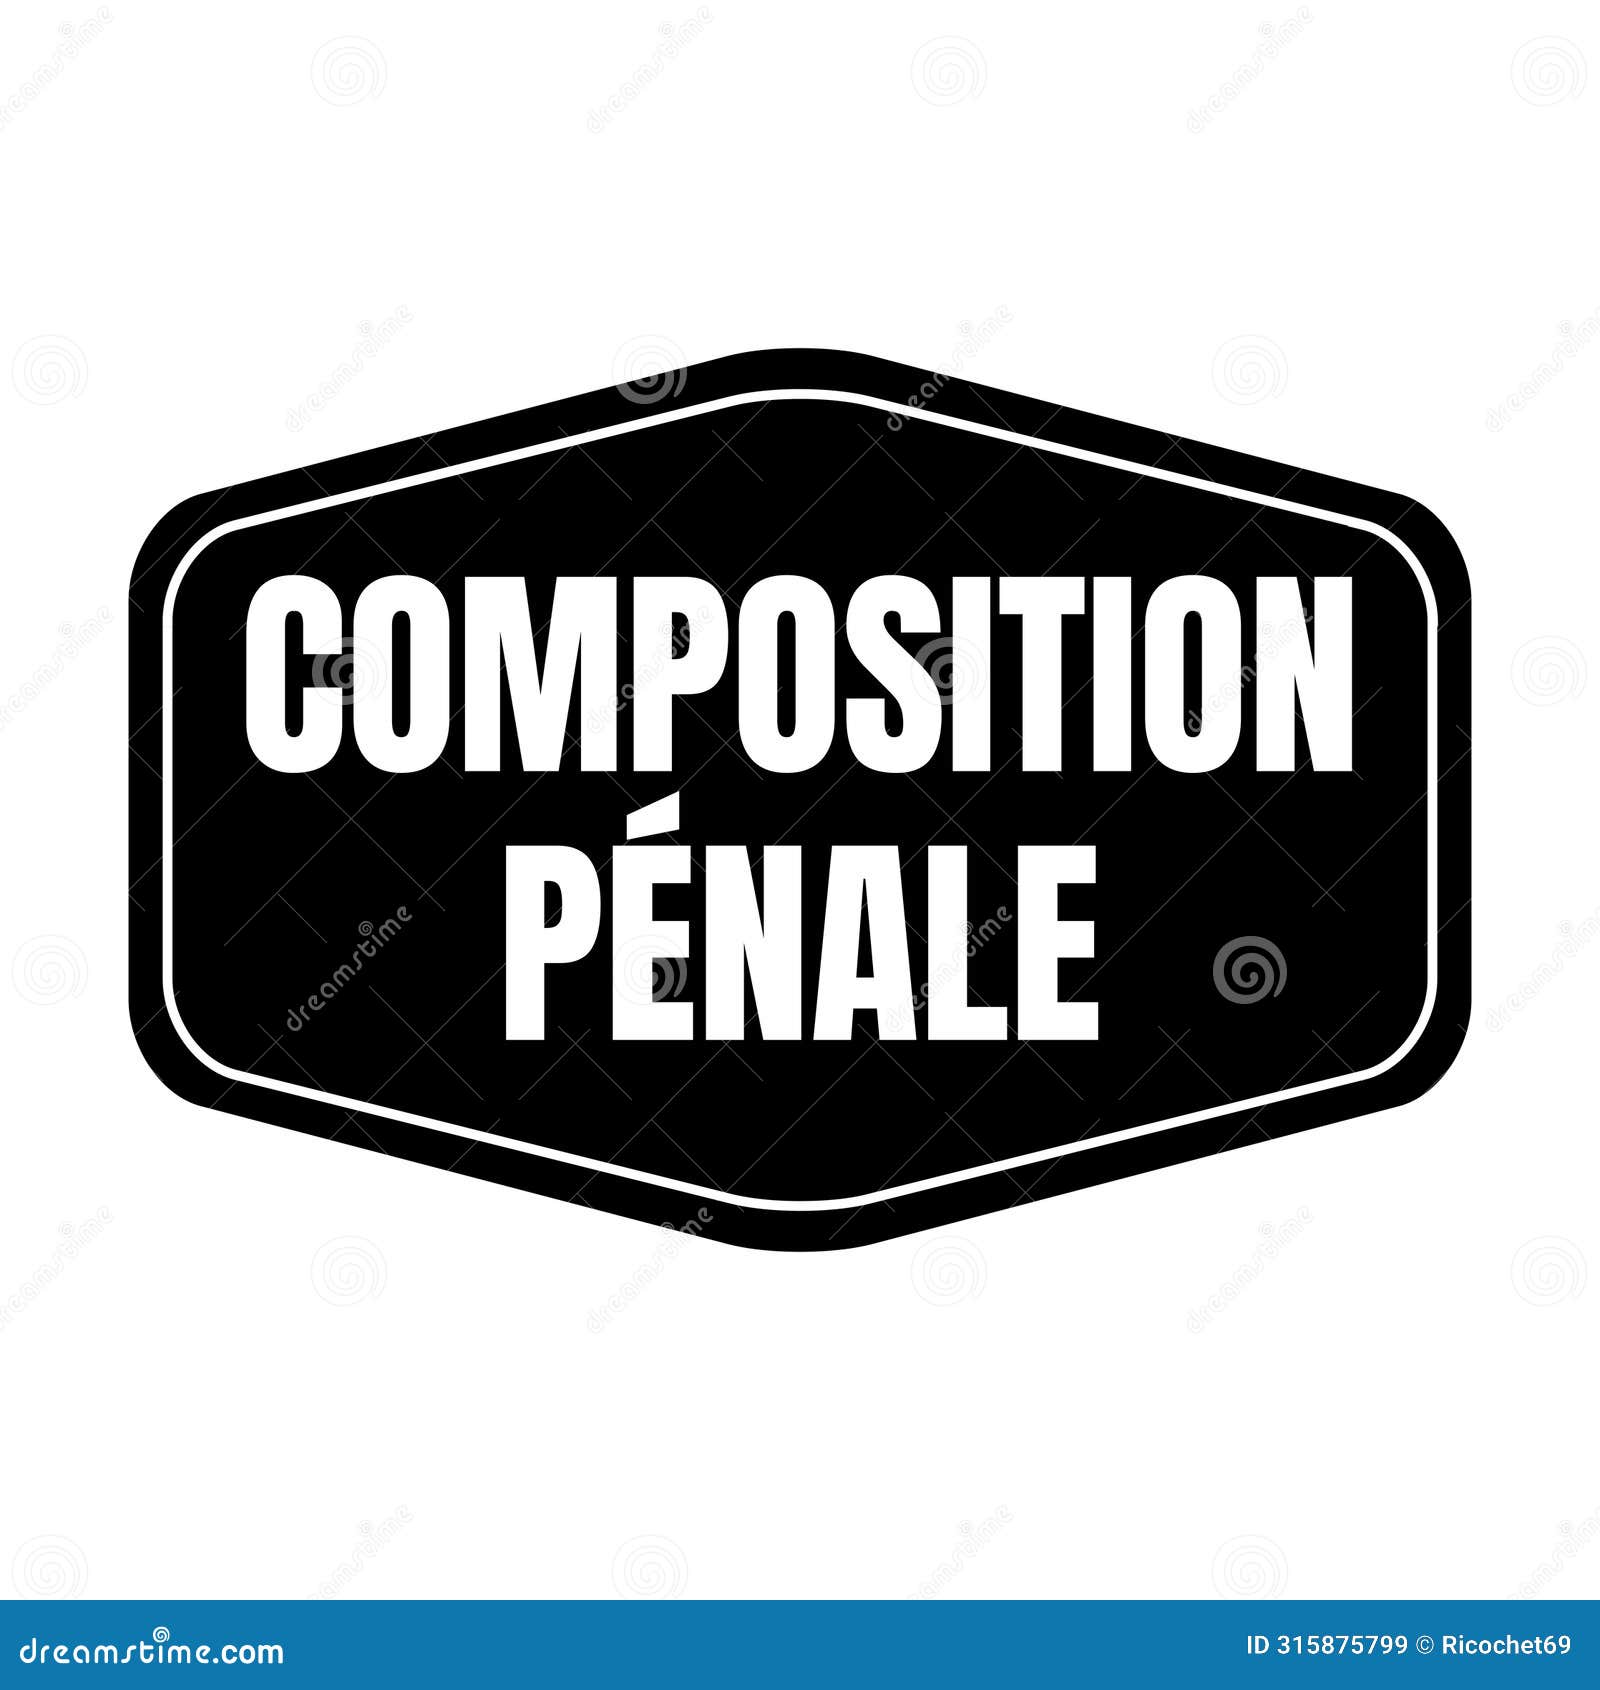 penal composition  icon in french language